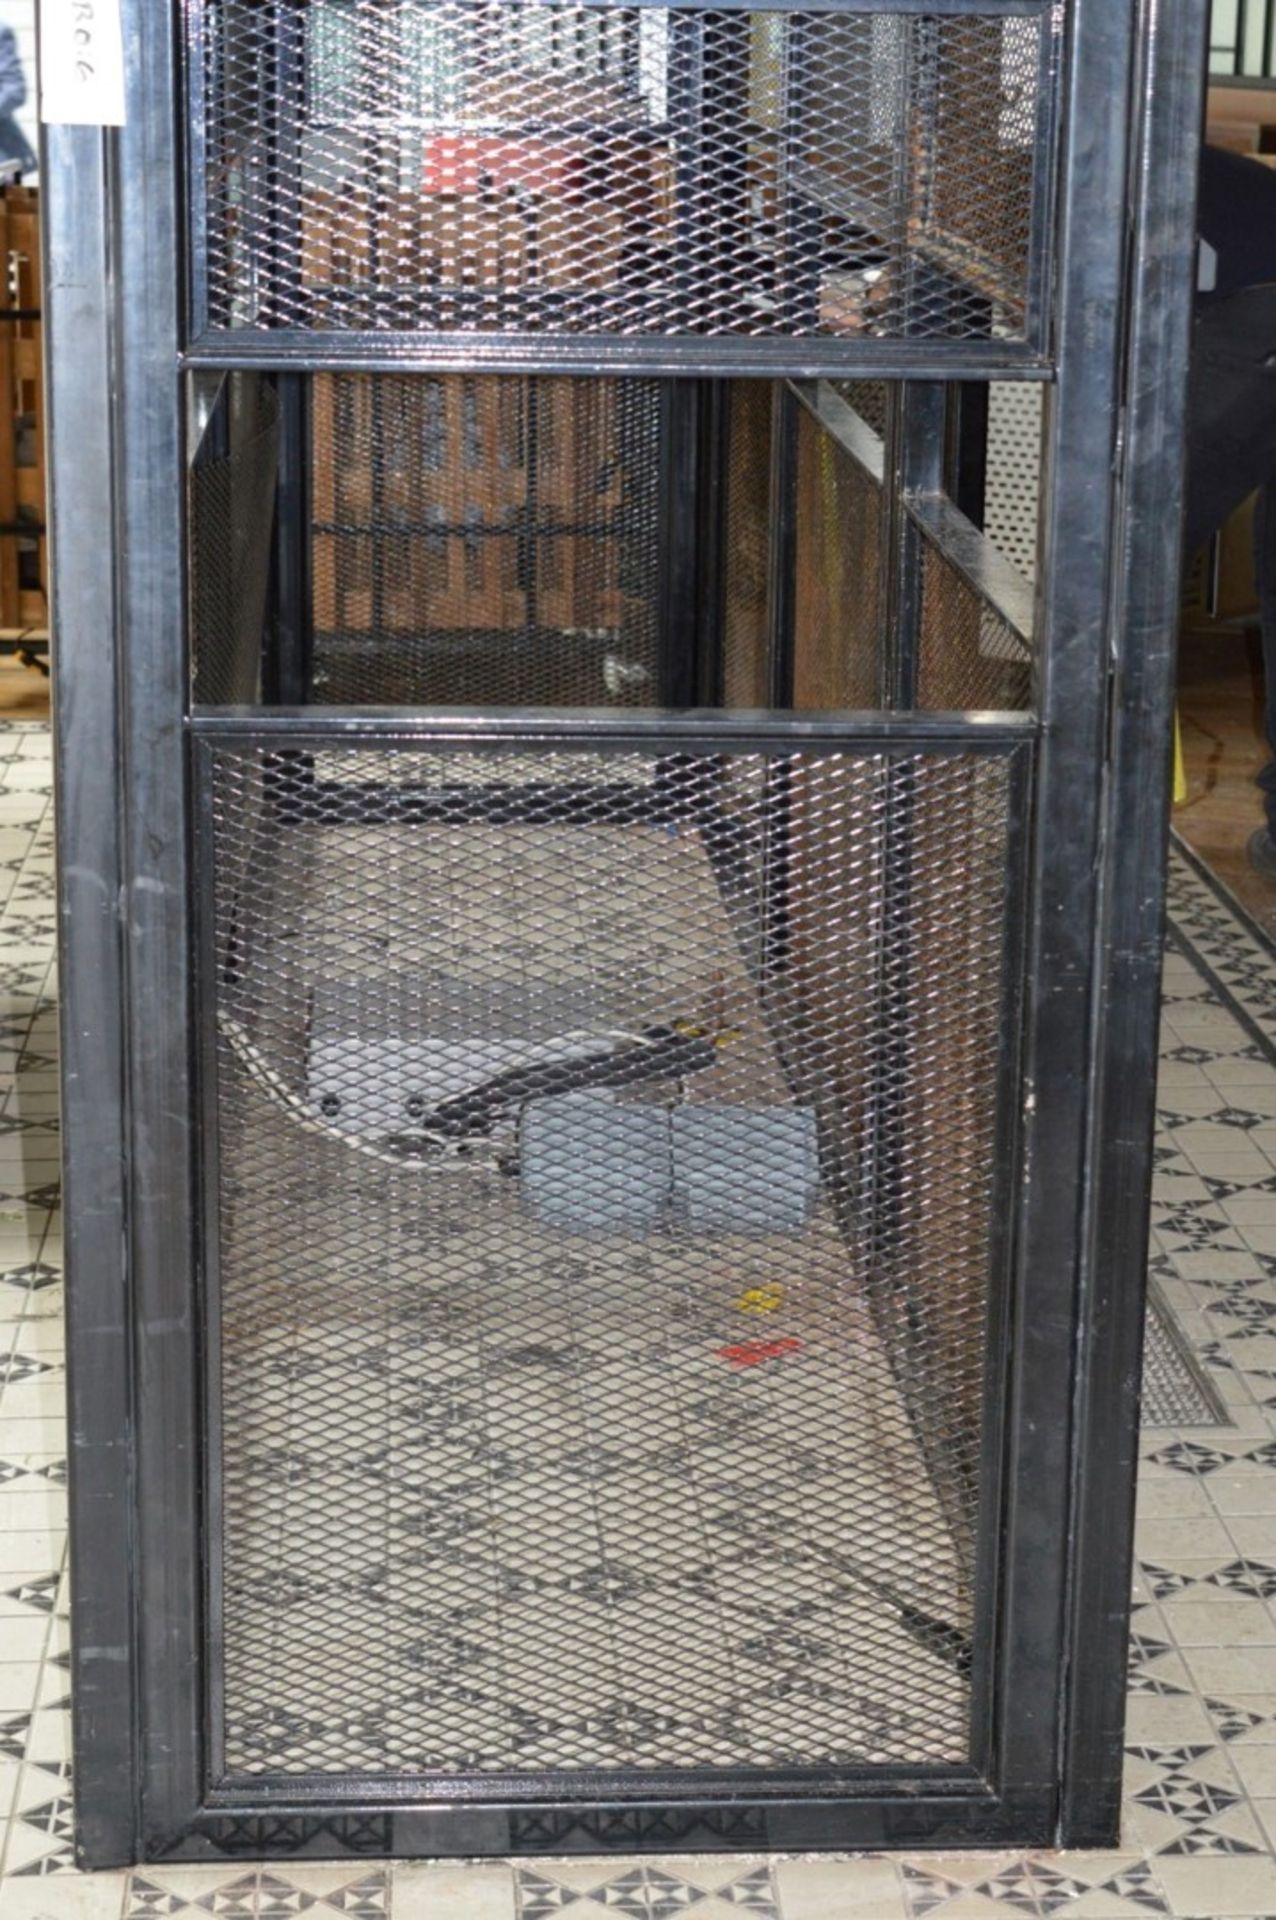 1 x Bespoke Custom Lobster Tank Holding Cage - Overall Size H395 x W258.5 x D82cm - Image 8 of 14